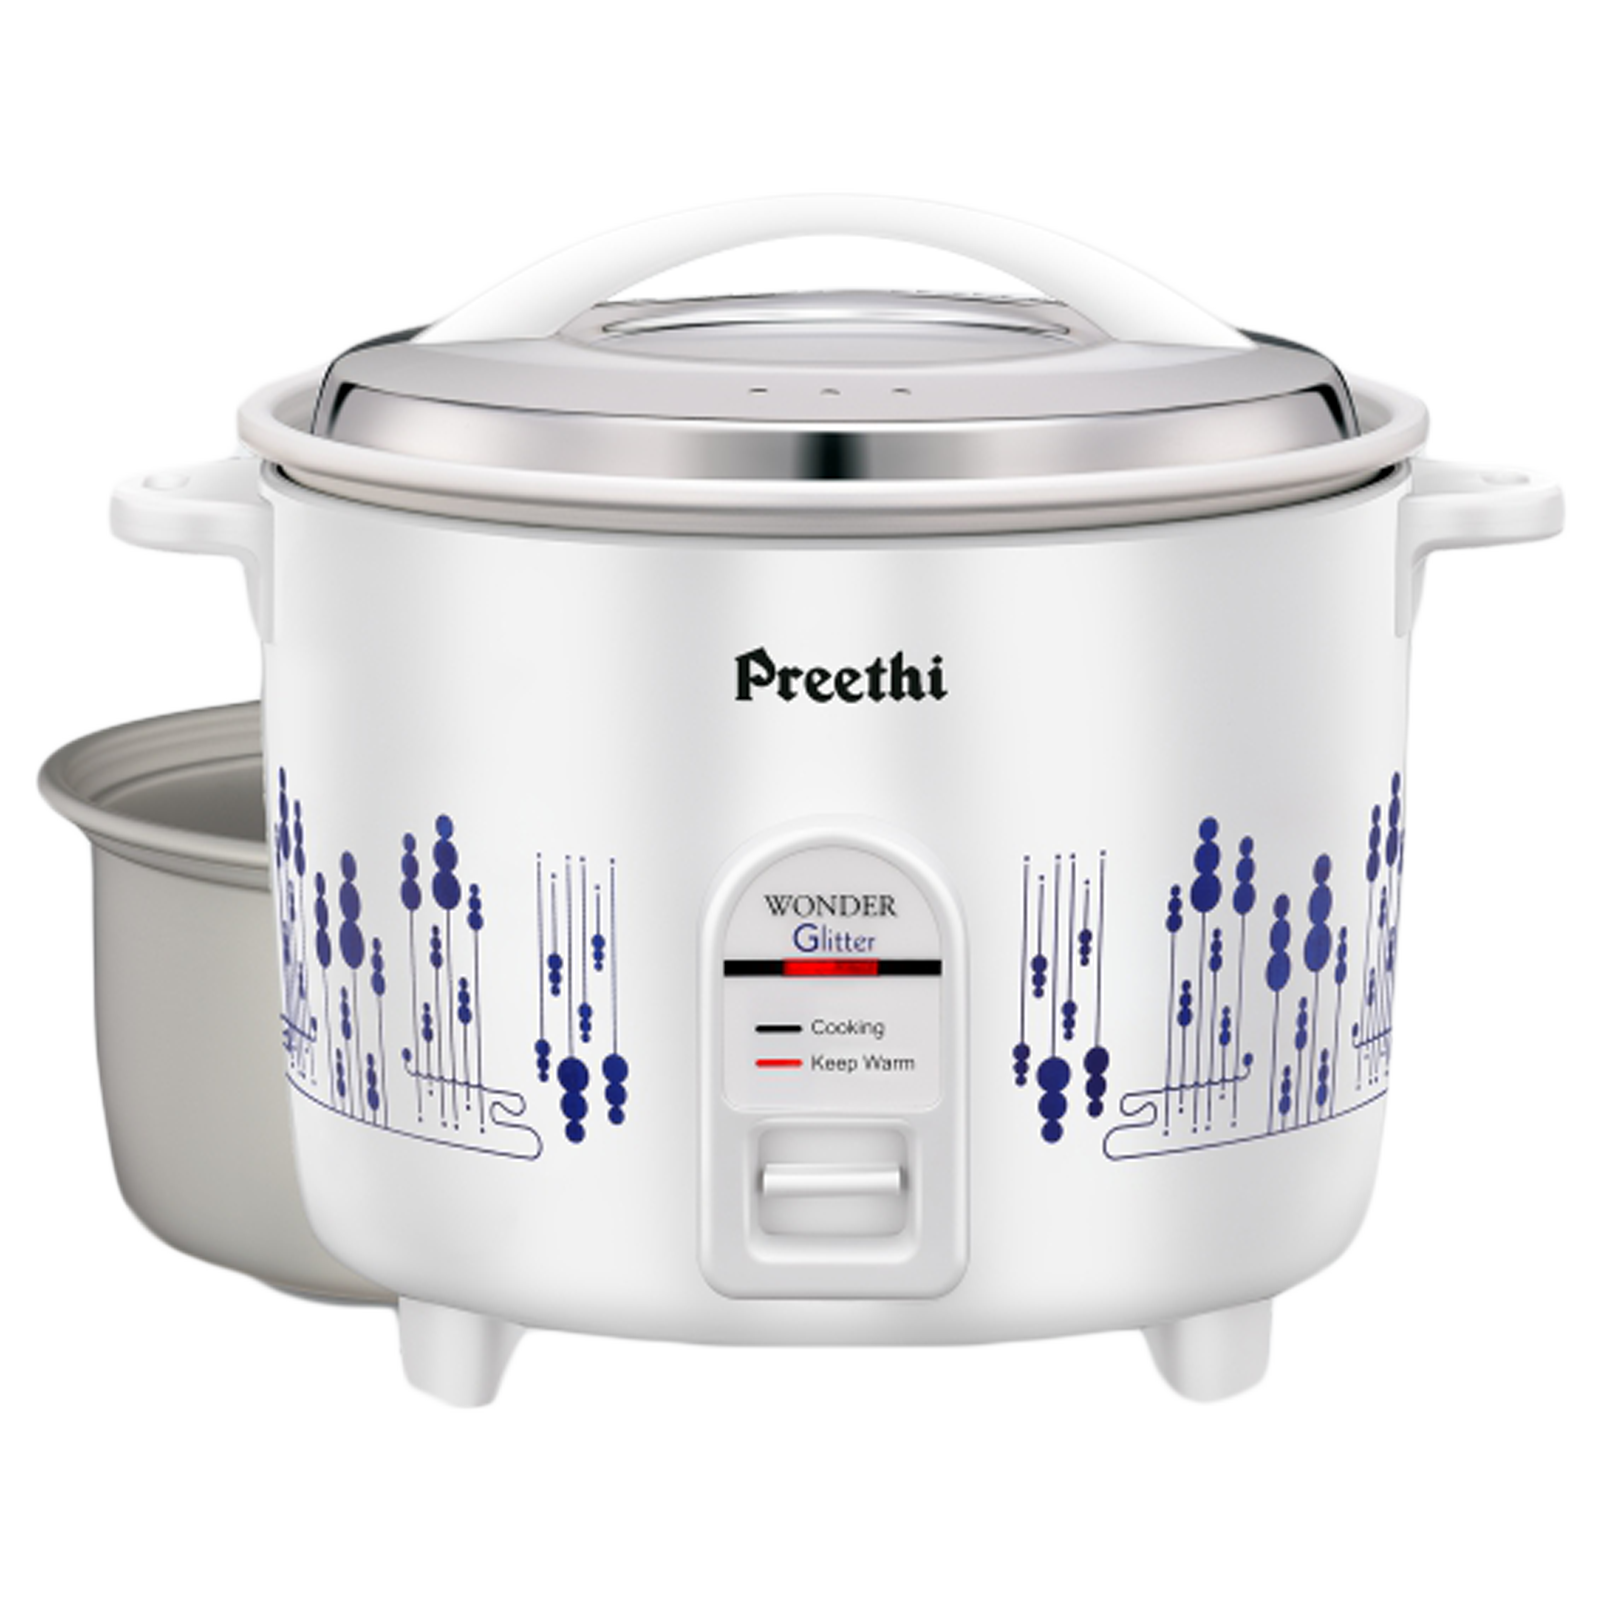 Preethi Glitter 2.2 Litres Electric Rice Cooker (Anodized Aluminium Pan, RC326 DP, White)_1